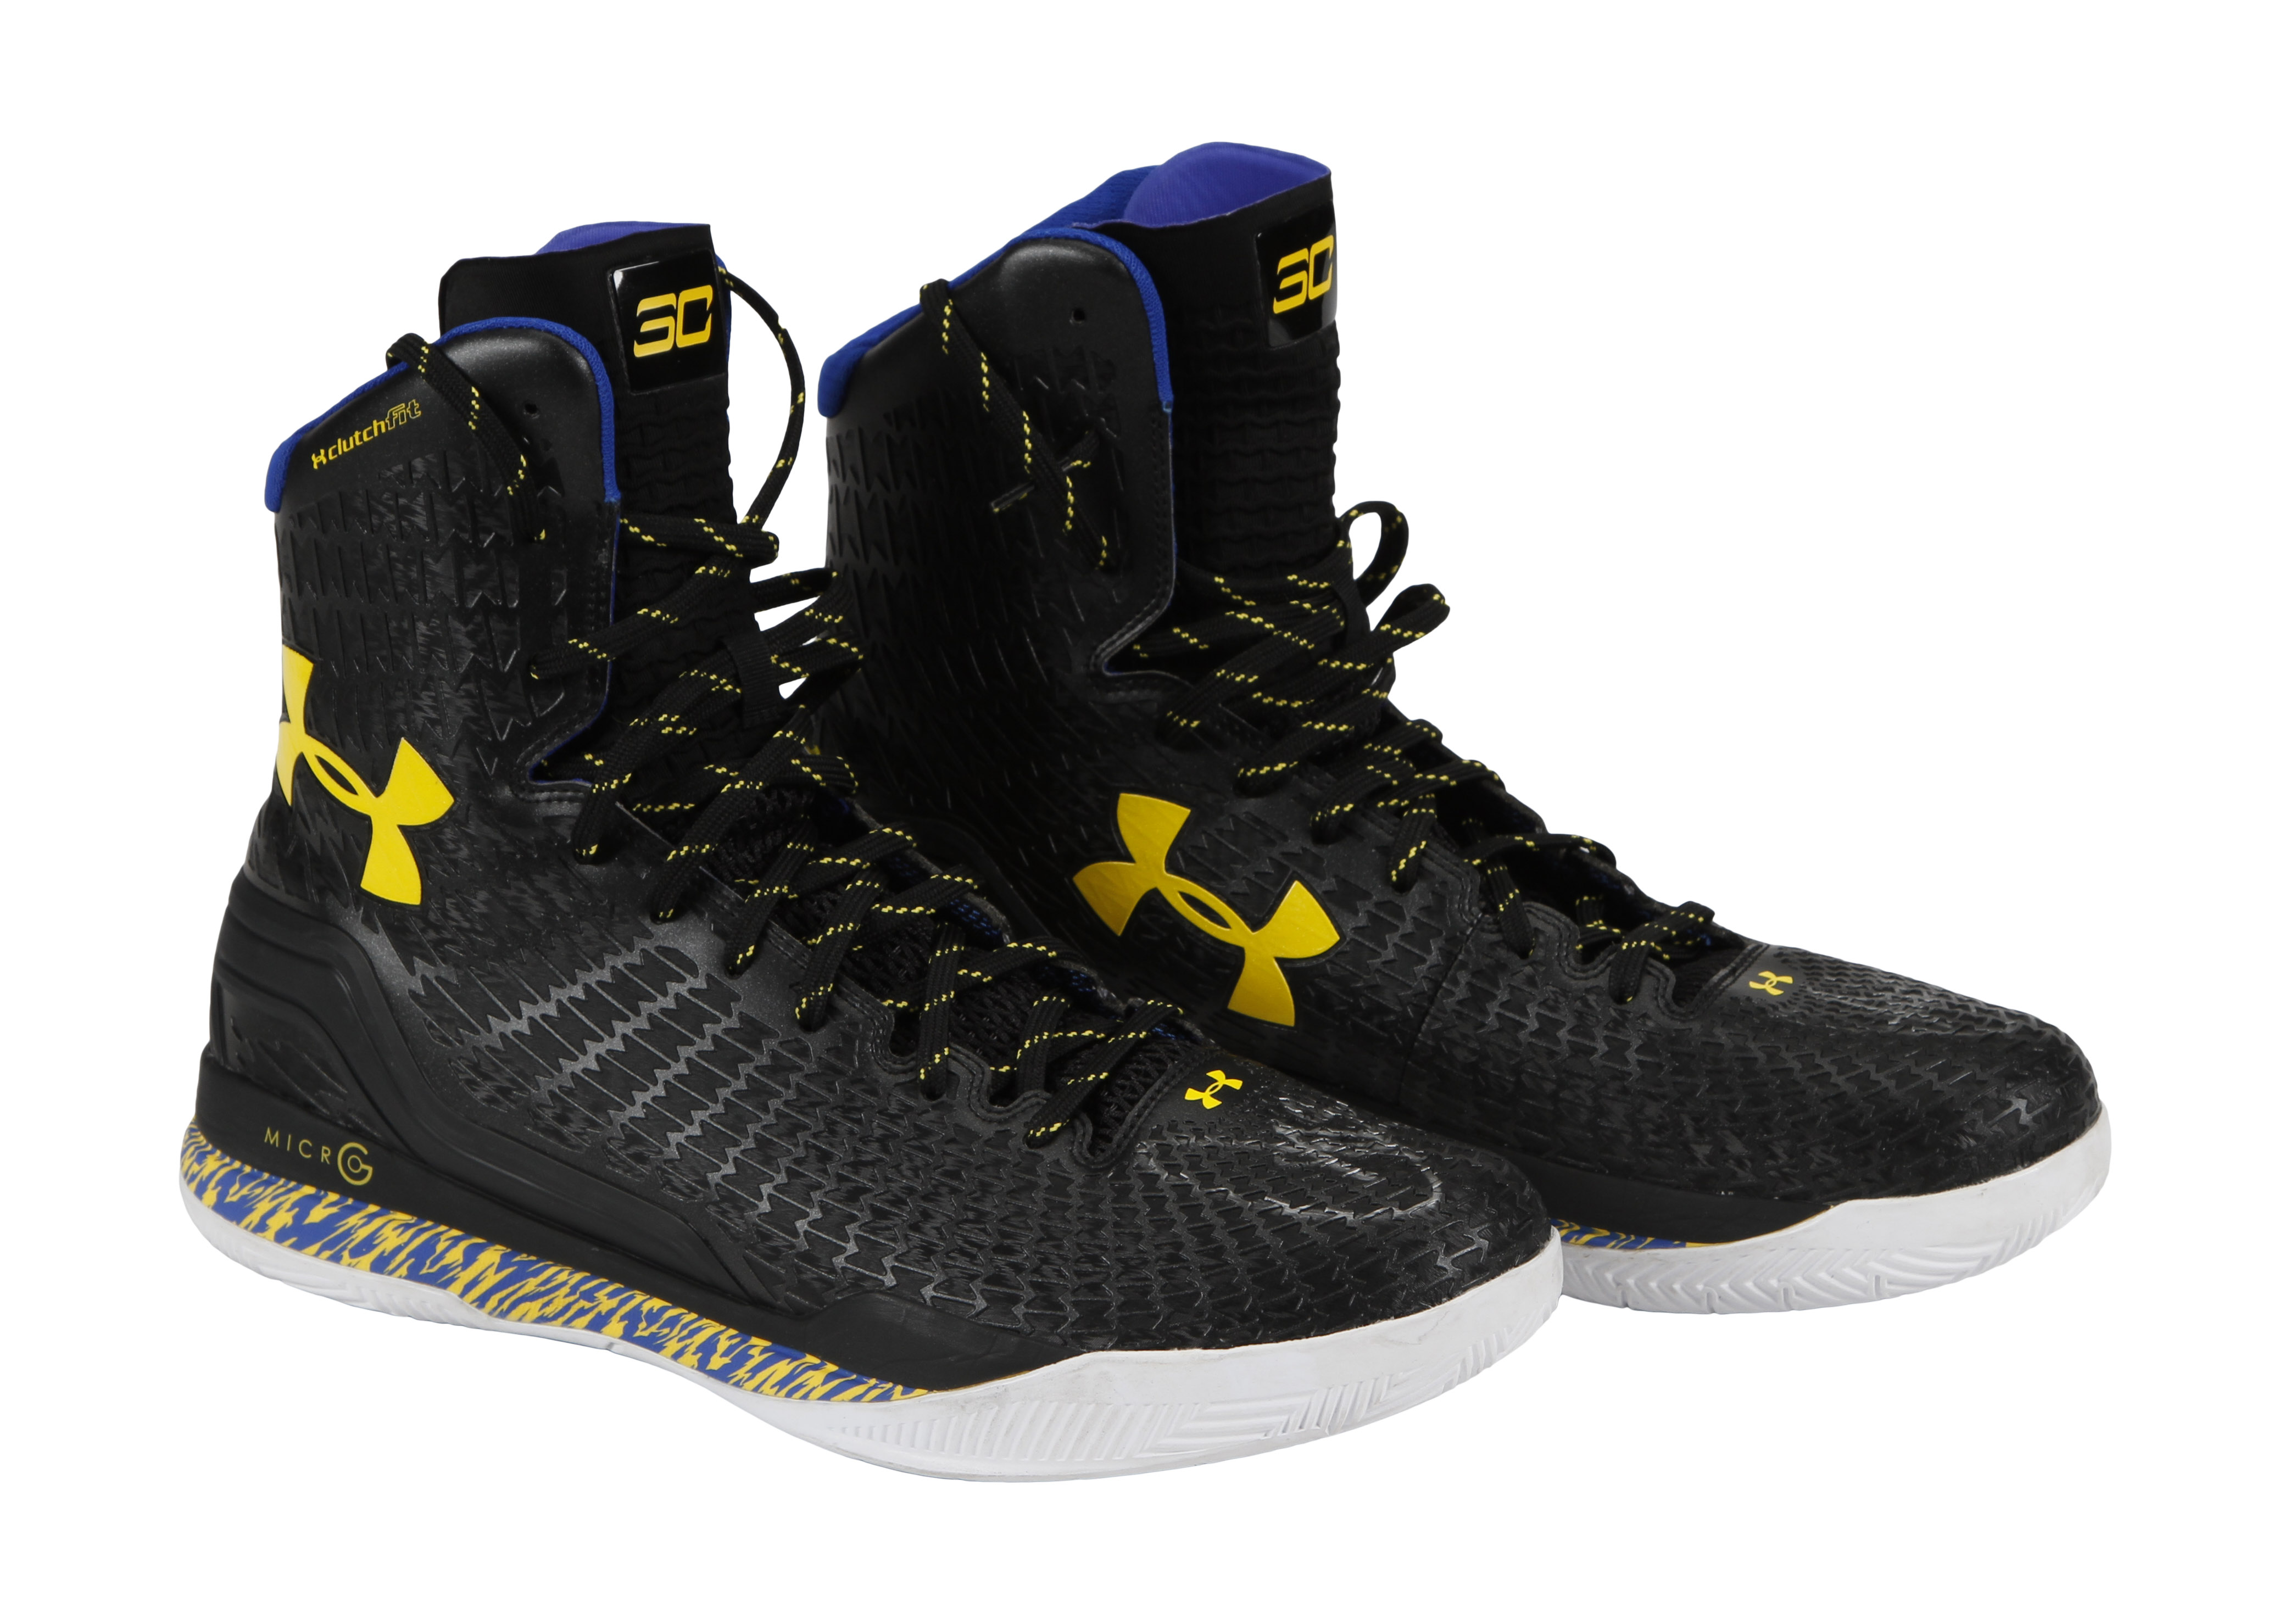 blue stephen curry shoes